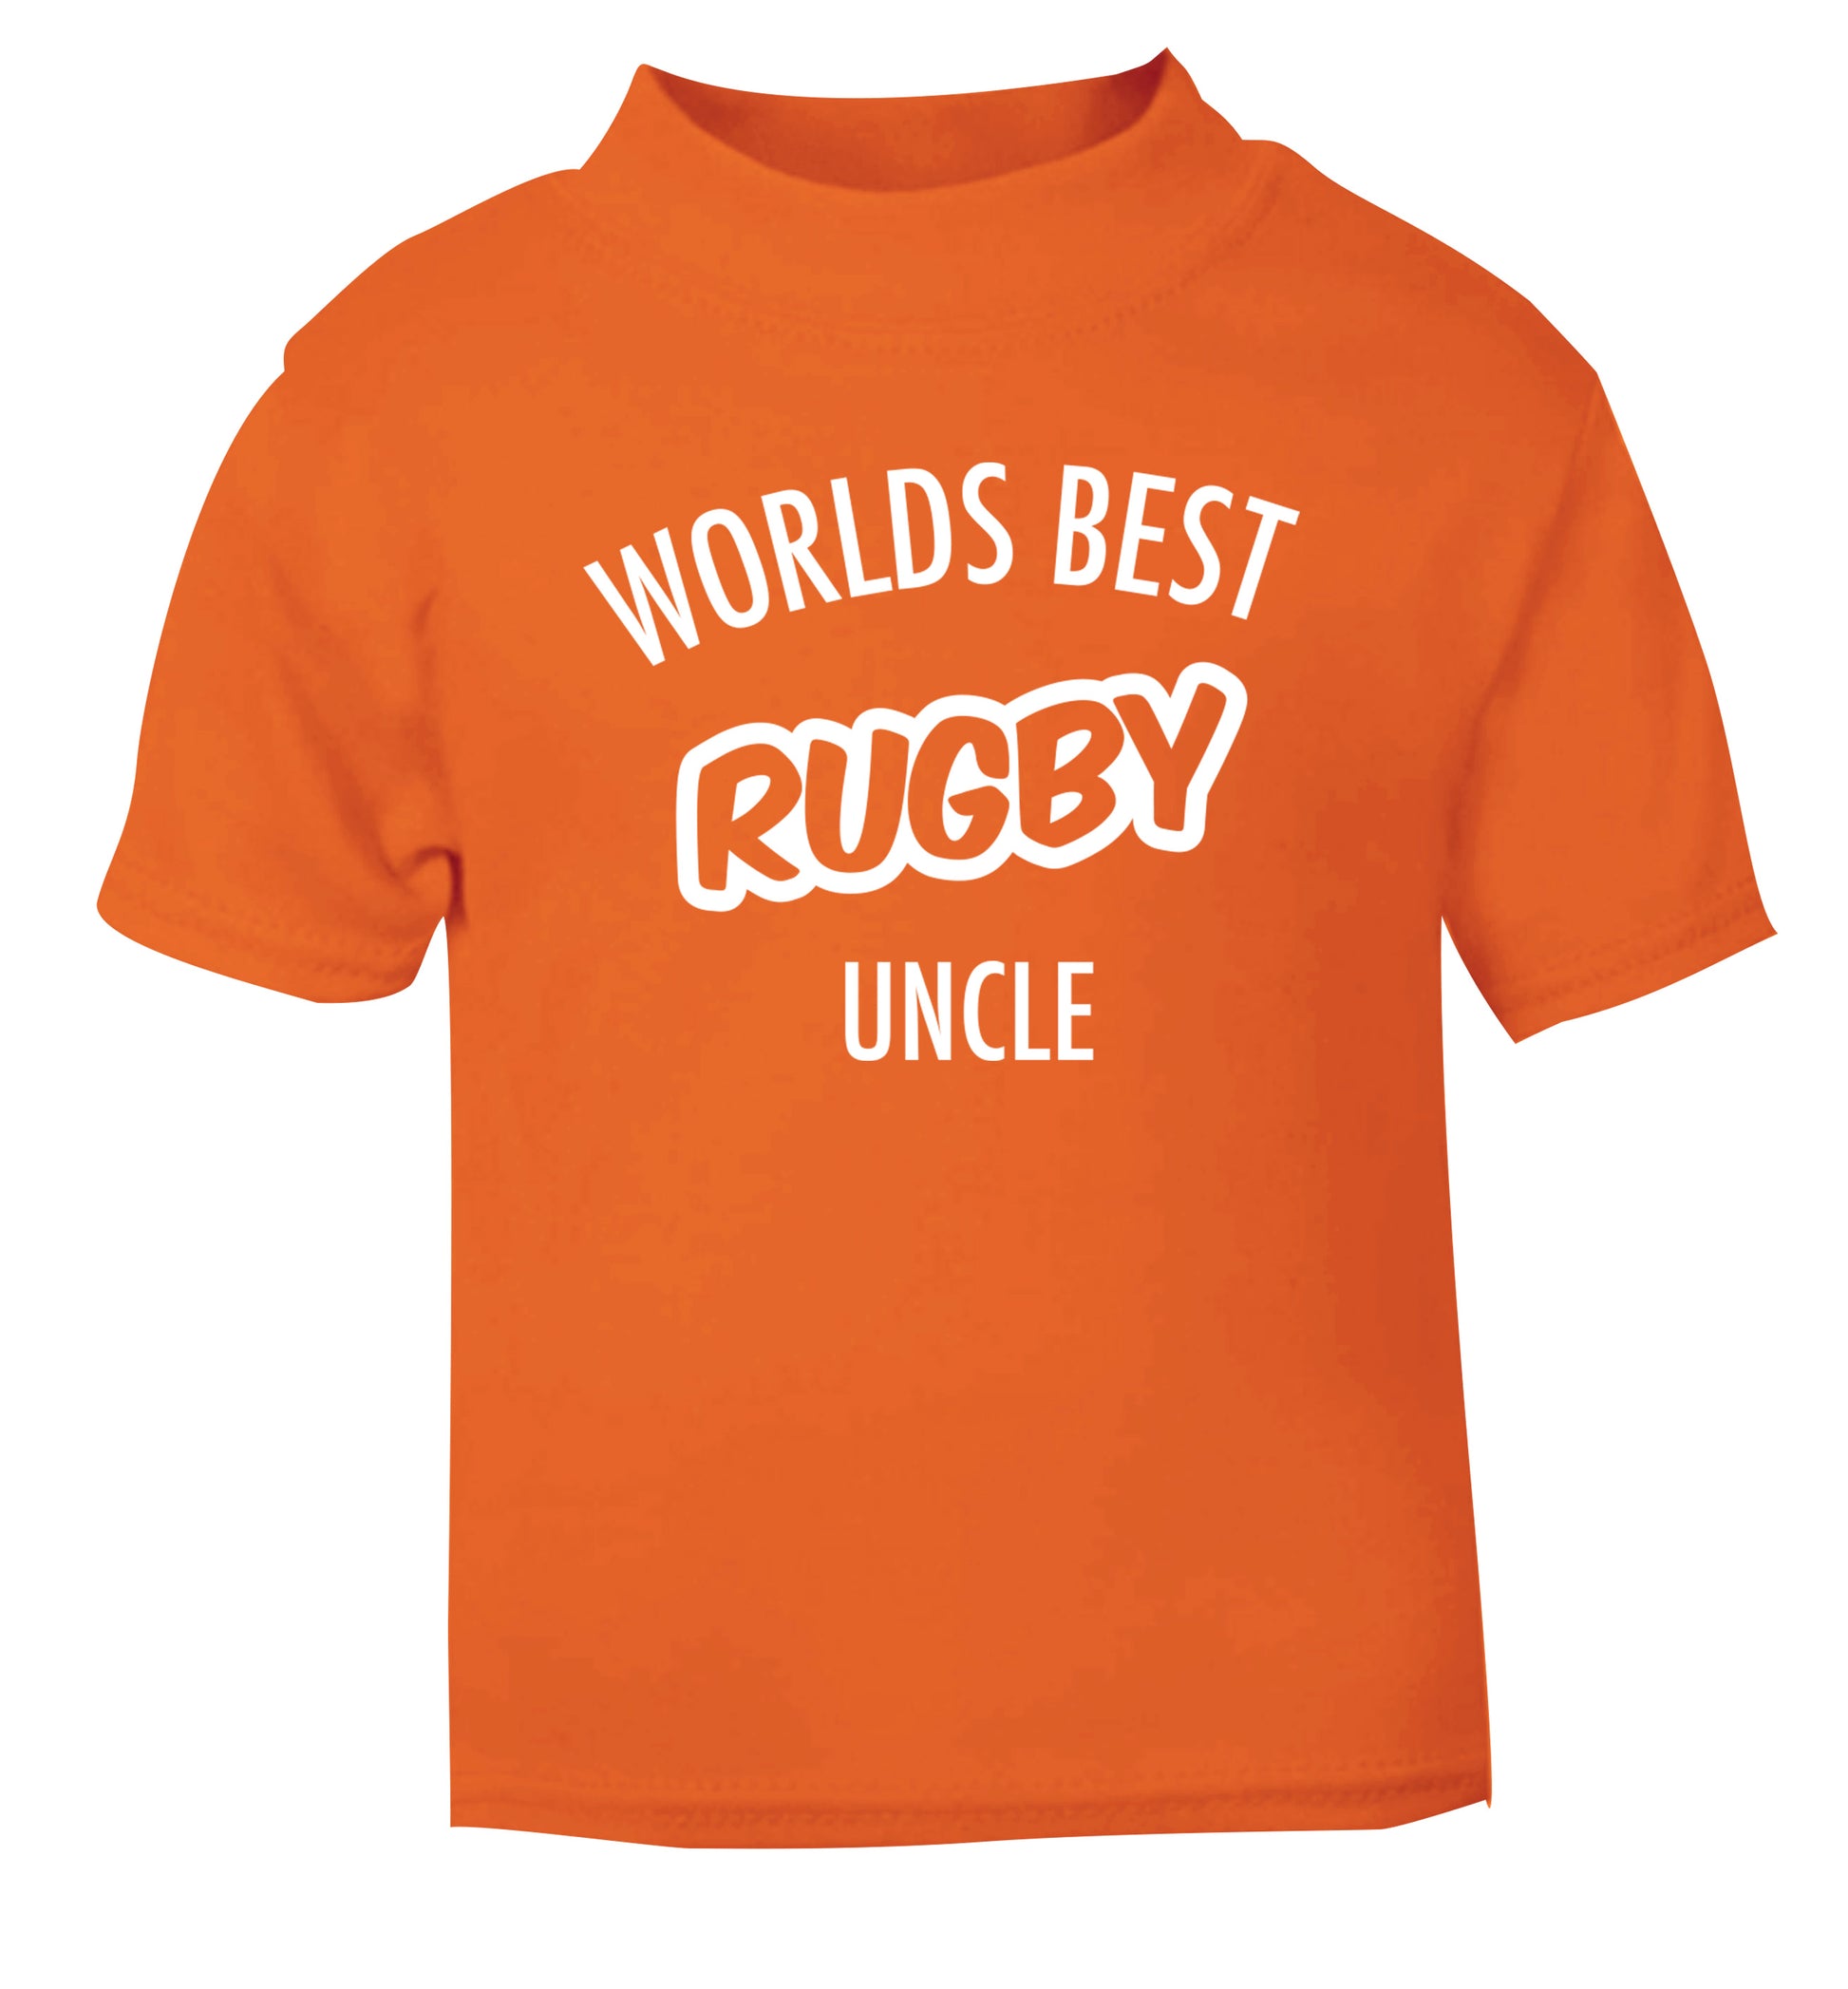 Worlds best rugby uncle orange Baby Toddler Tshirt 2 Years